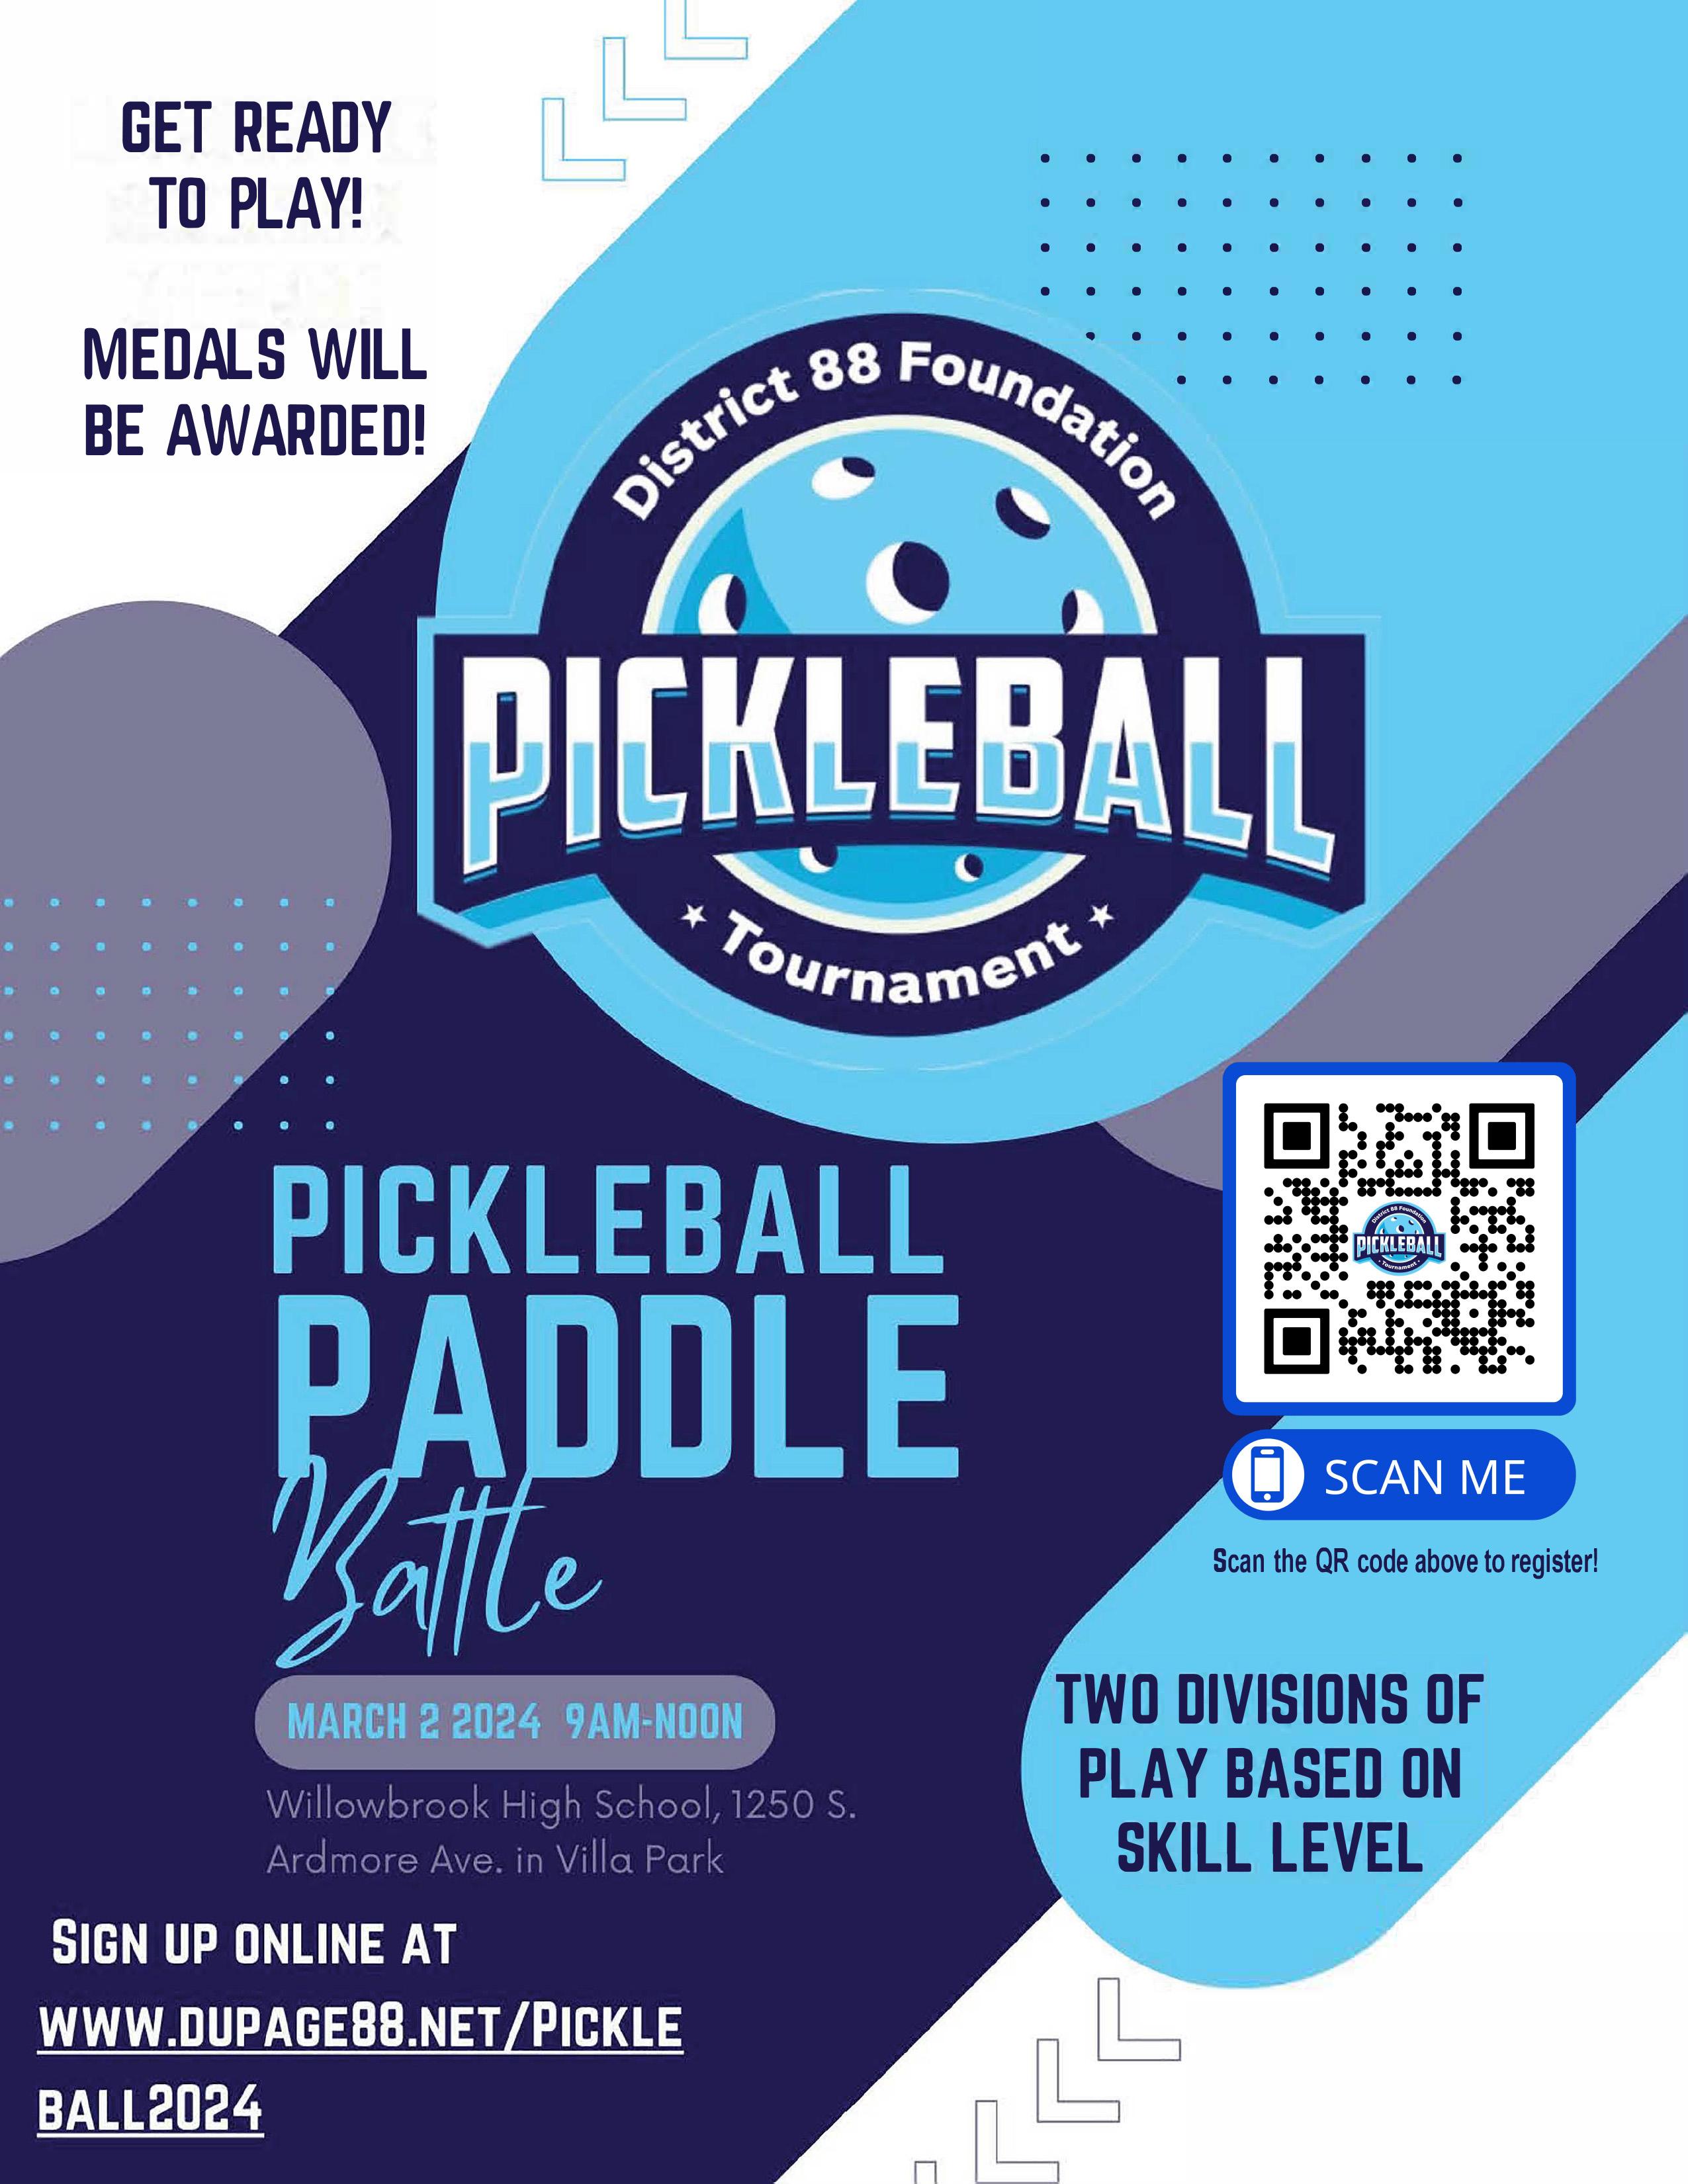 District 88 Foundation invites you to participate in its first ‘Paddle Battle’ pickleball tournament